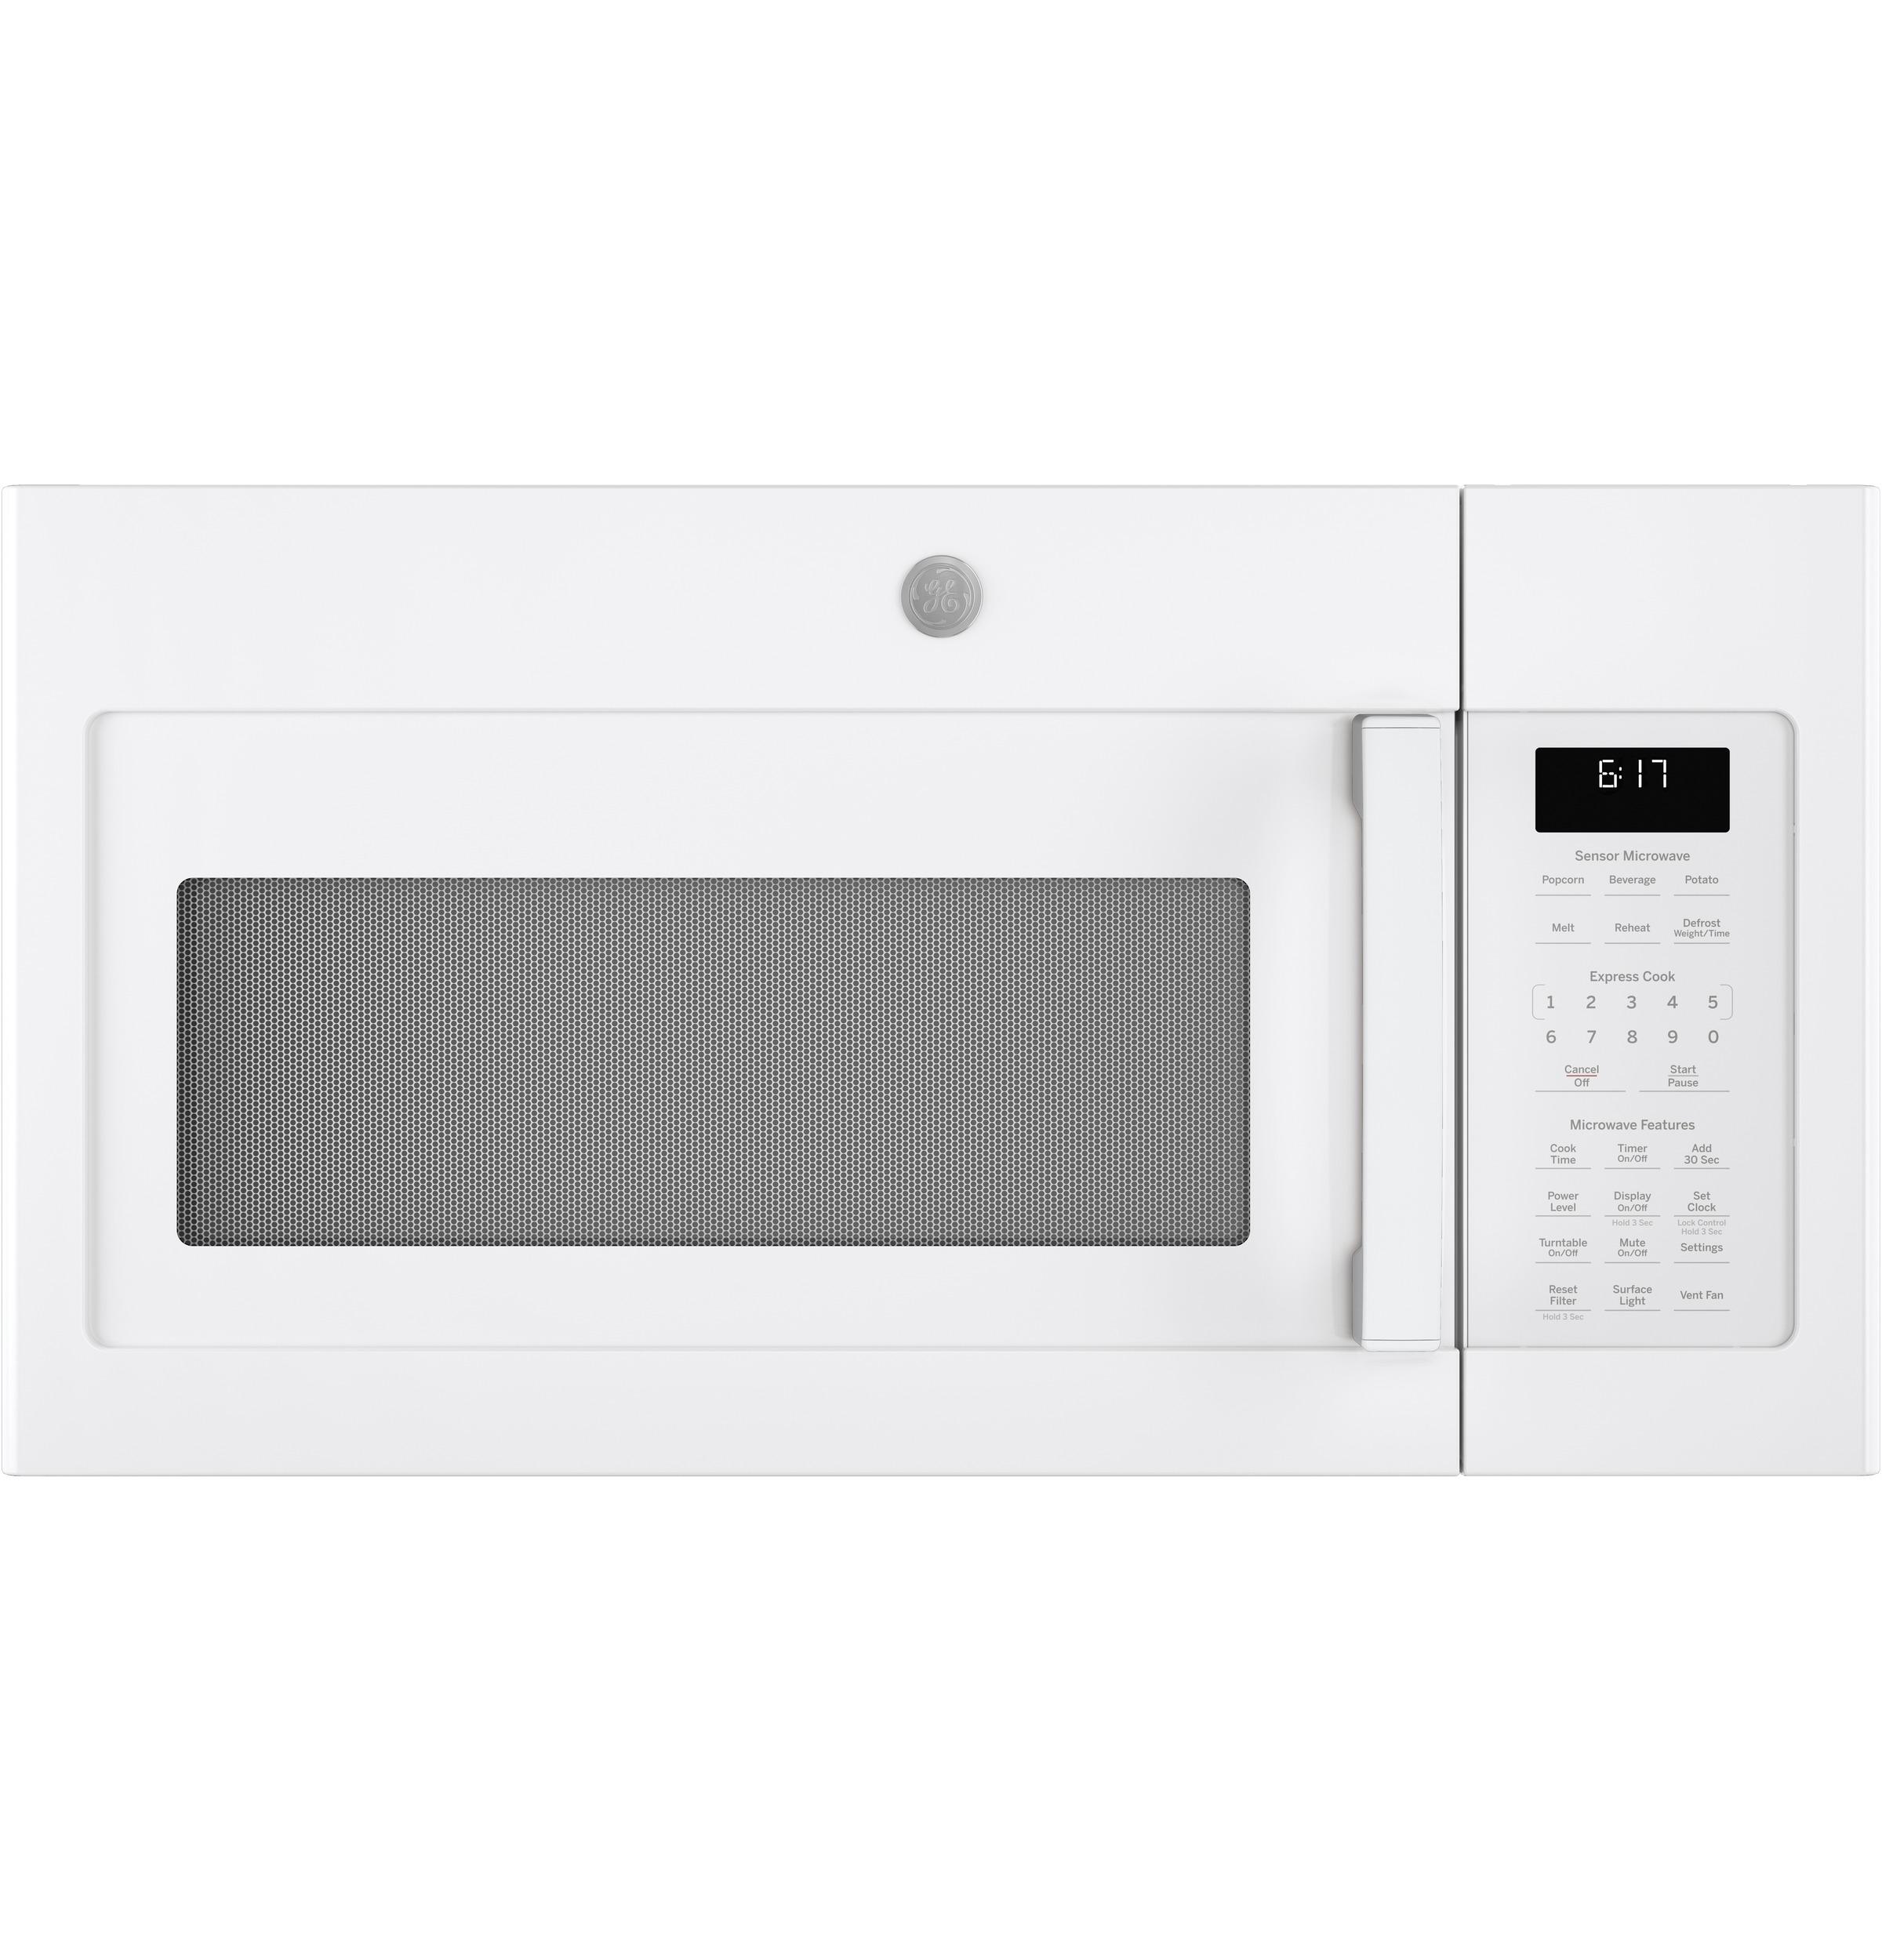 General Electric JVM6172DKWW 30 Inch Over the Range Microwave Oven White